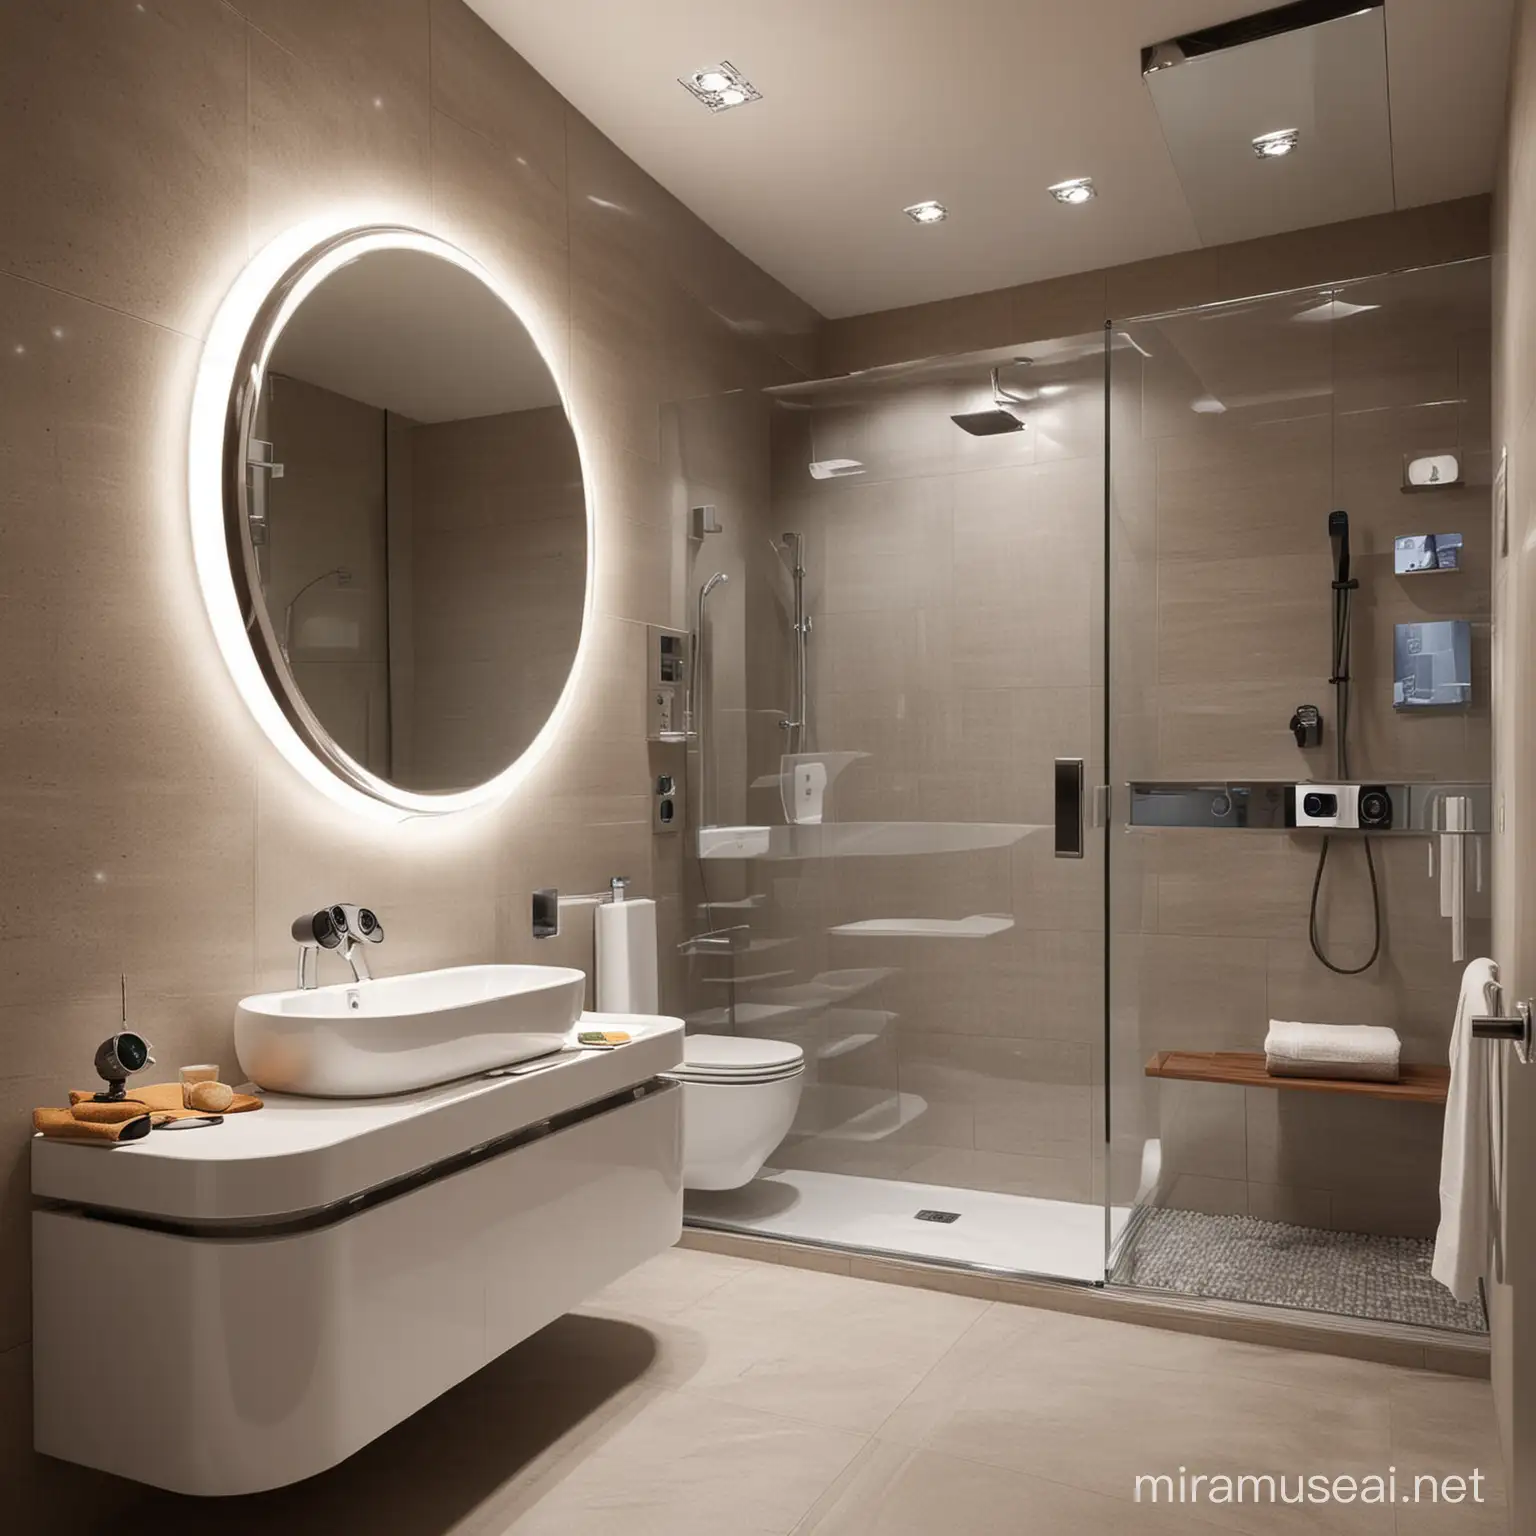 Futuristic WallE Inspired UltraModern Hotel Bathroom with Service Robot